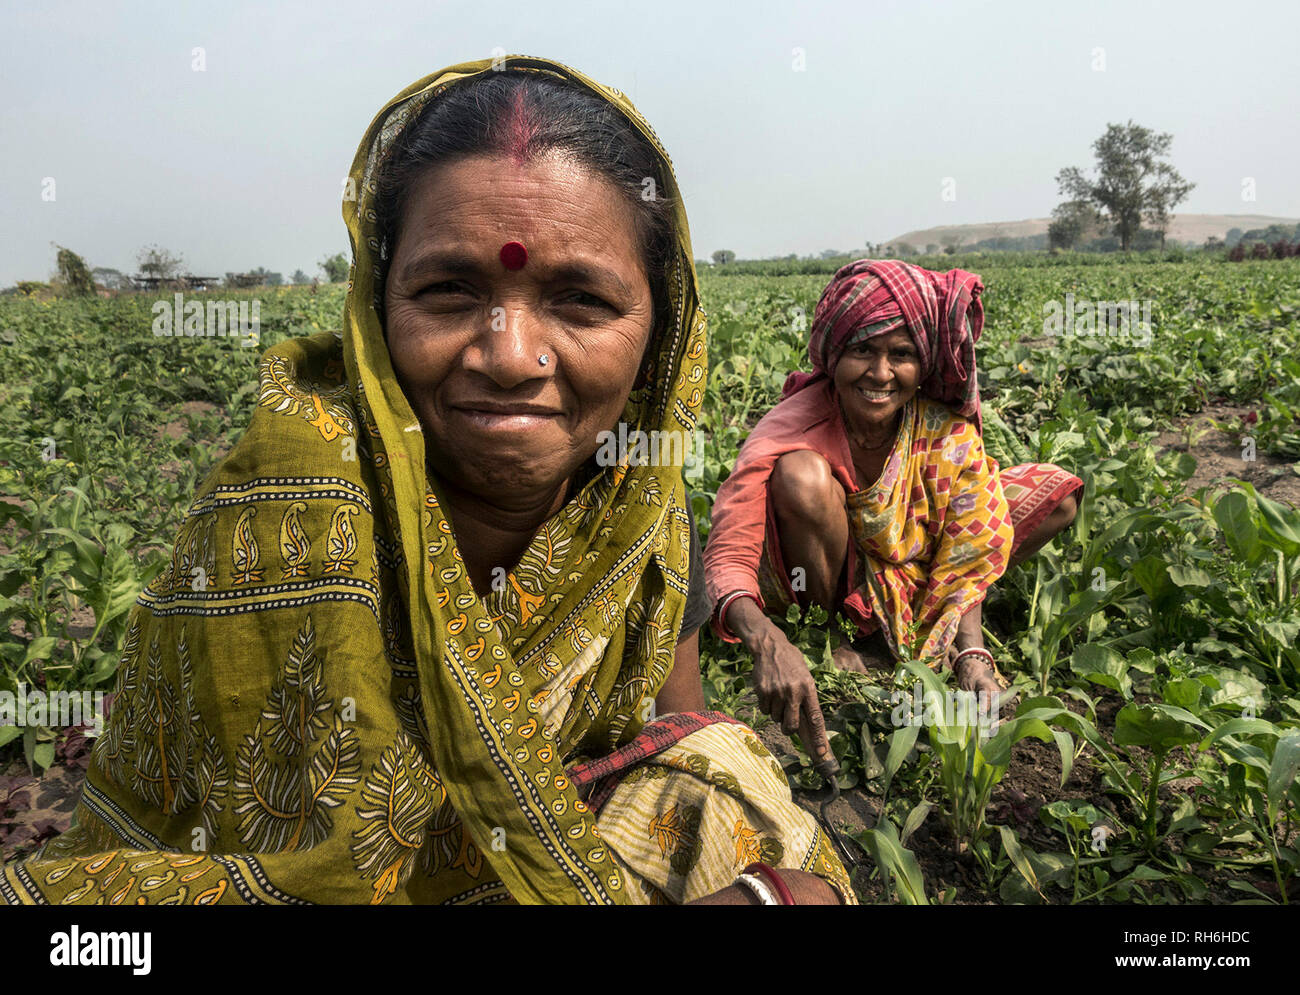 Kolkata, India. 1st Feb, 2019. Peasants work in a field in Kolkata, India, on Feb. 1, 2019. The government of India on Friday announced a 'direct money transfer' scheme for small and marginalized farmers owning up to two acres of agriculture land, whereby the farmers would receive 6,000 Indian Rupees annually from the government. Credit: Tumpa Mondal/Xinhua/Alamy Live News Stock Photo